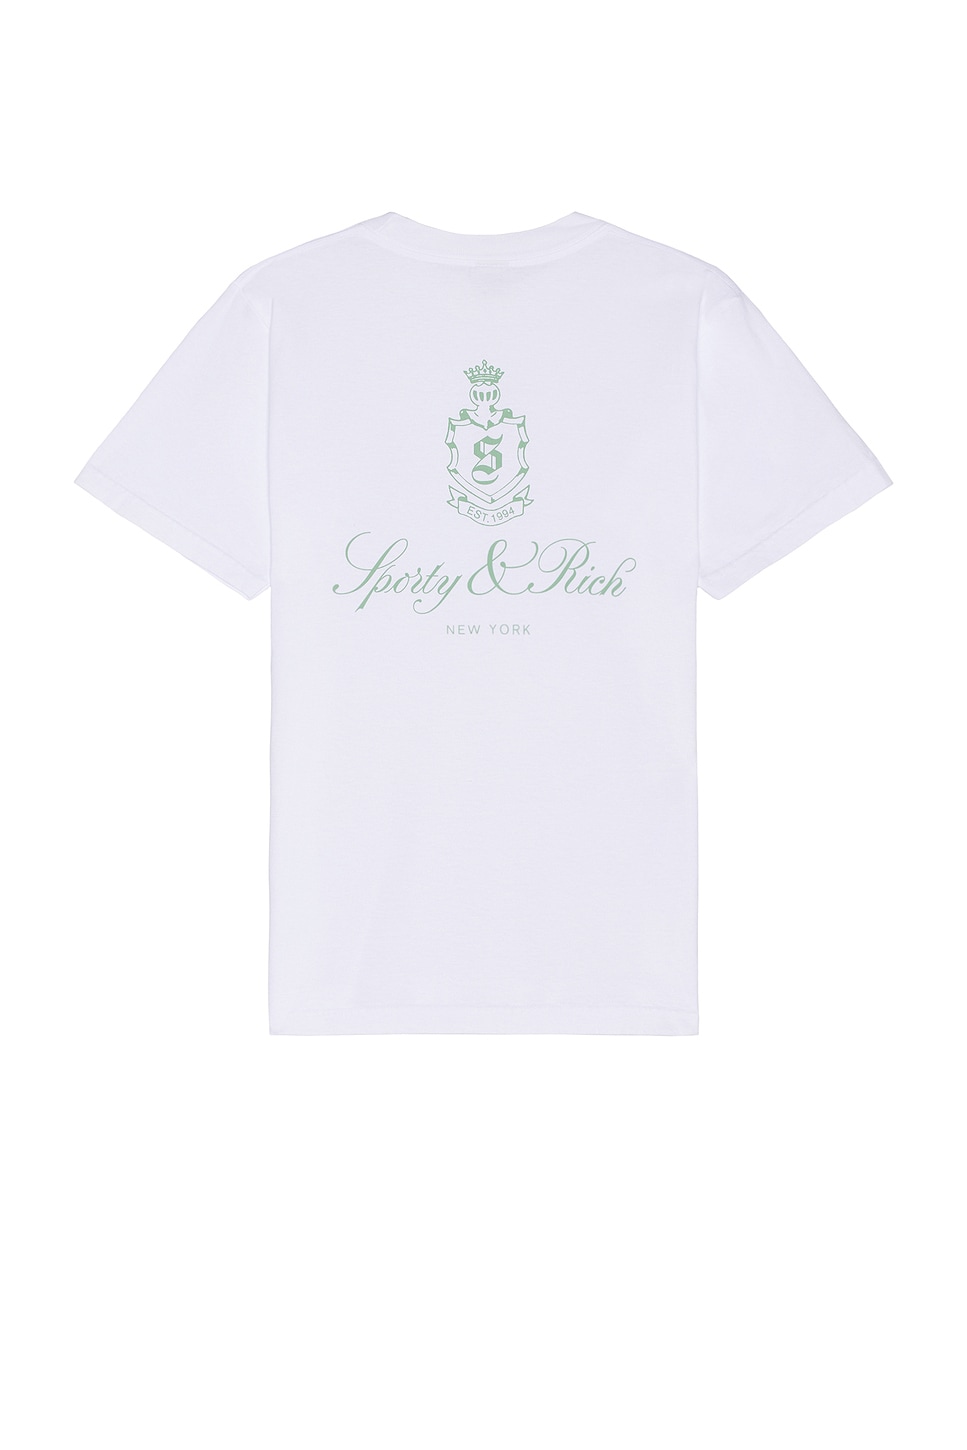 Image 1 of Sporty & Rich Vendome T-shirt in White & Sage